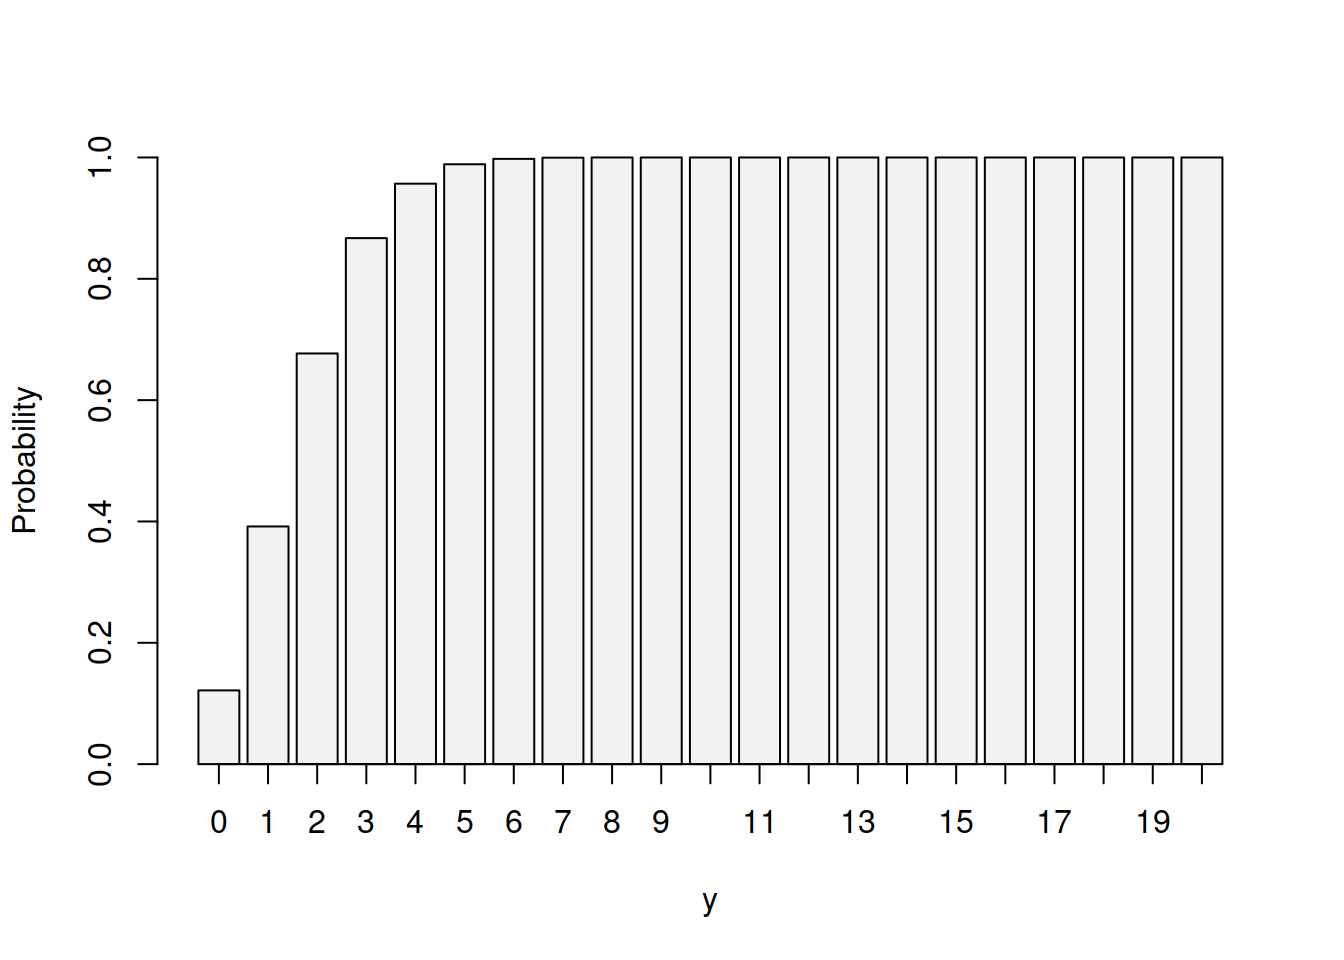 Cumulative Distribution Function for Binomial distribution with p=0.1 and n=20.